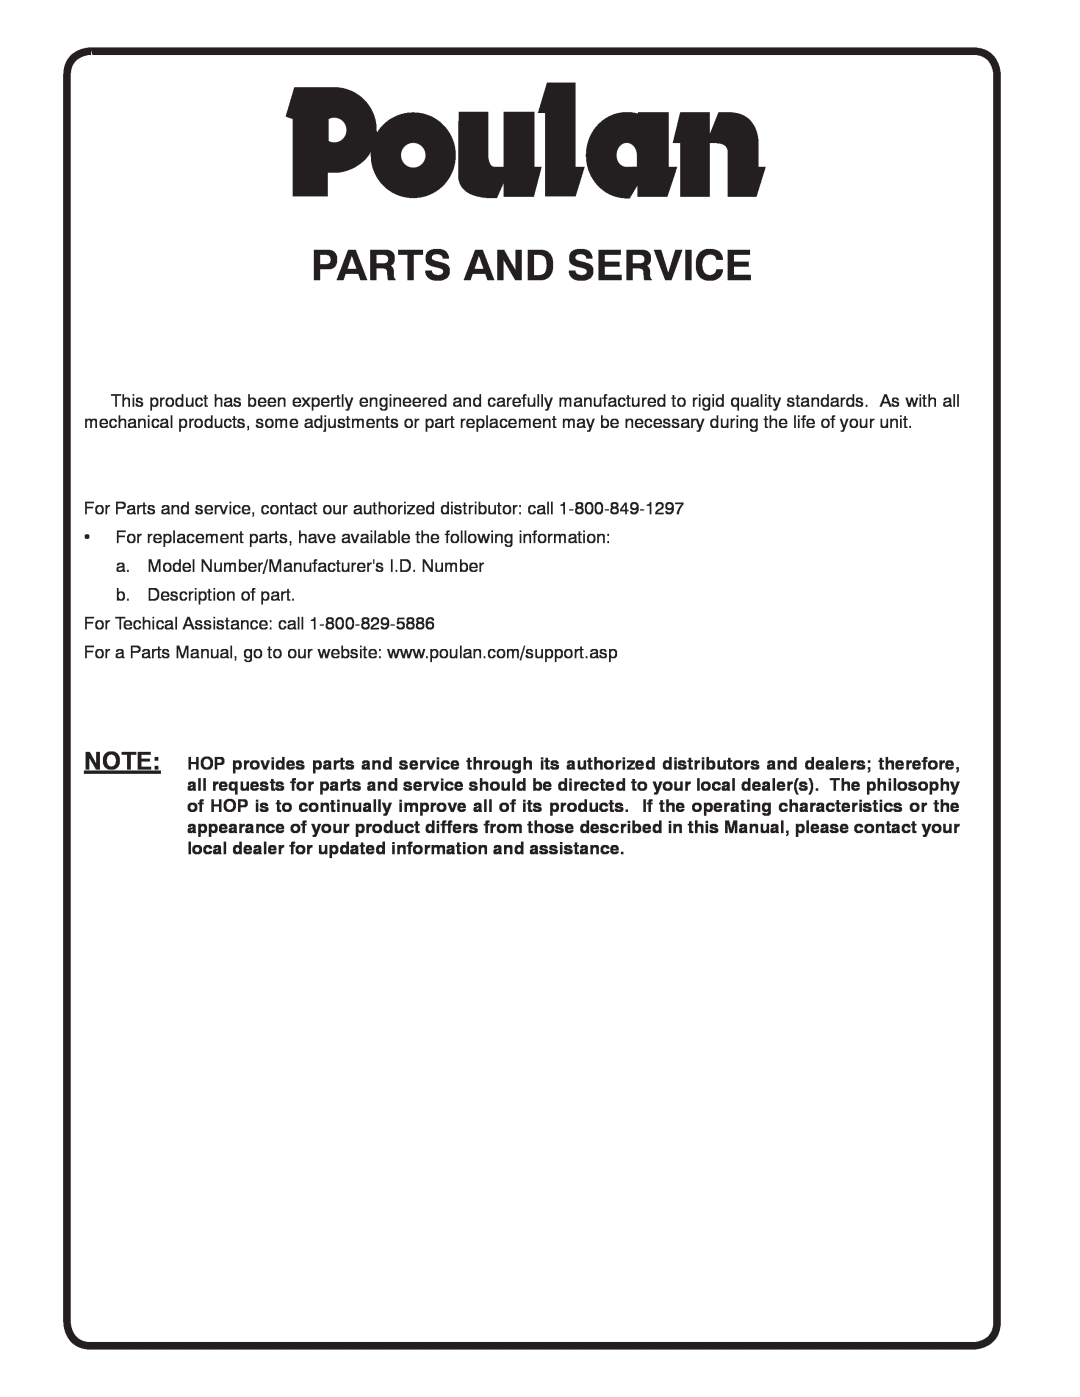 Poulan 425001 manual Parts And Service 